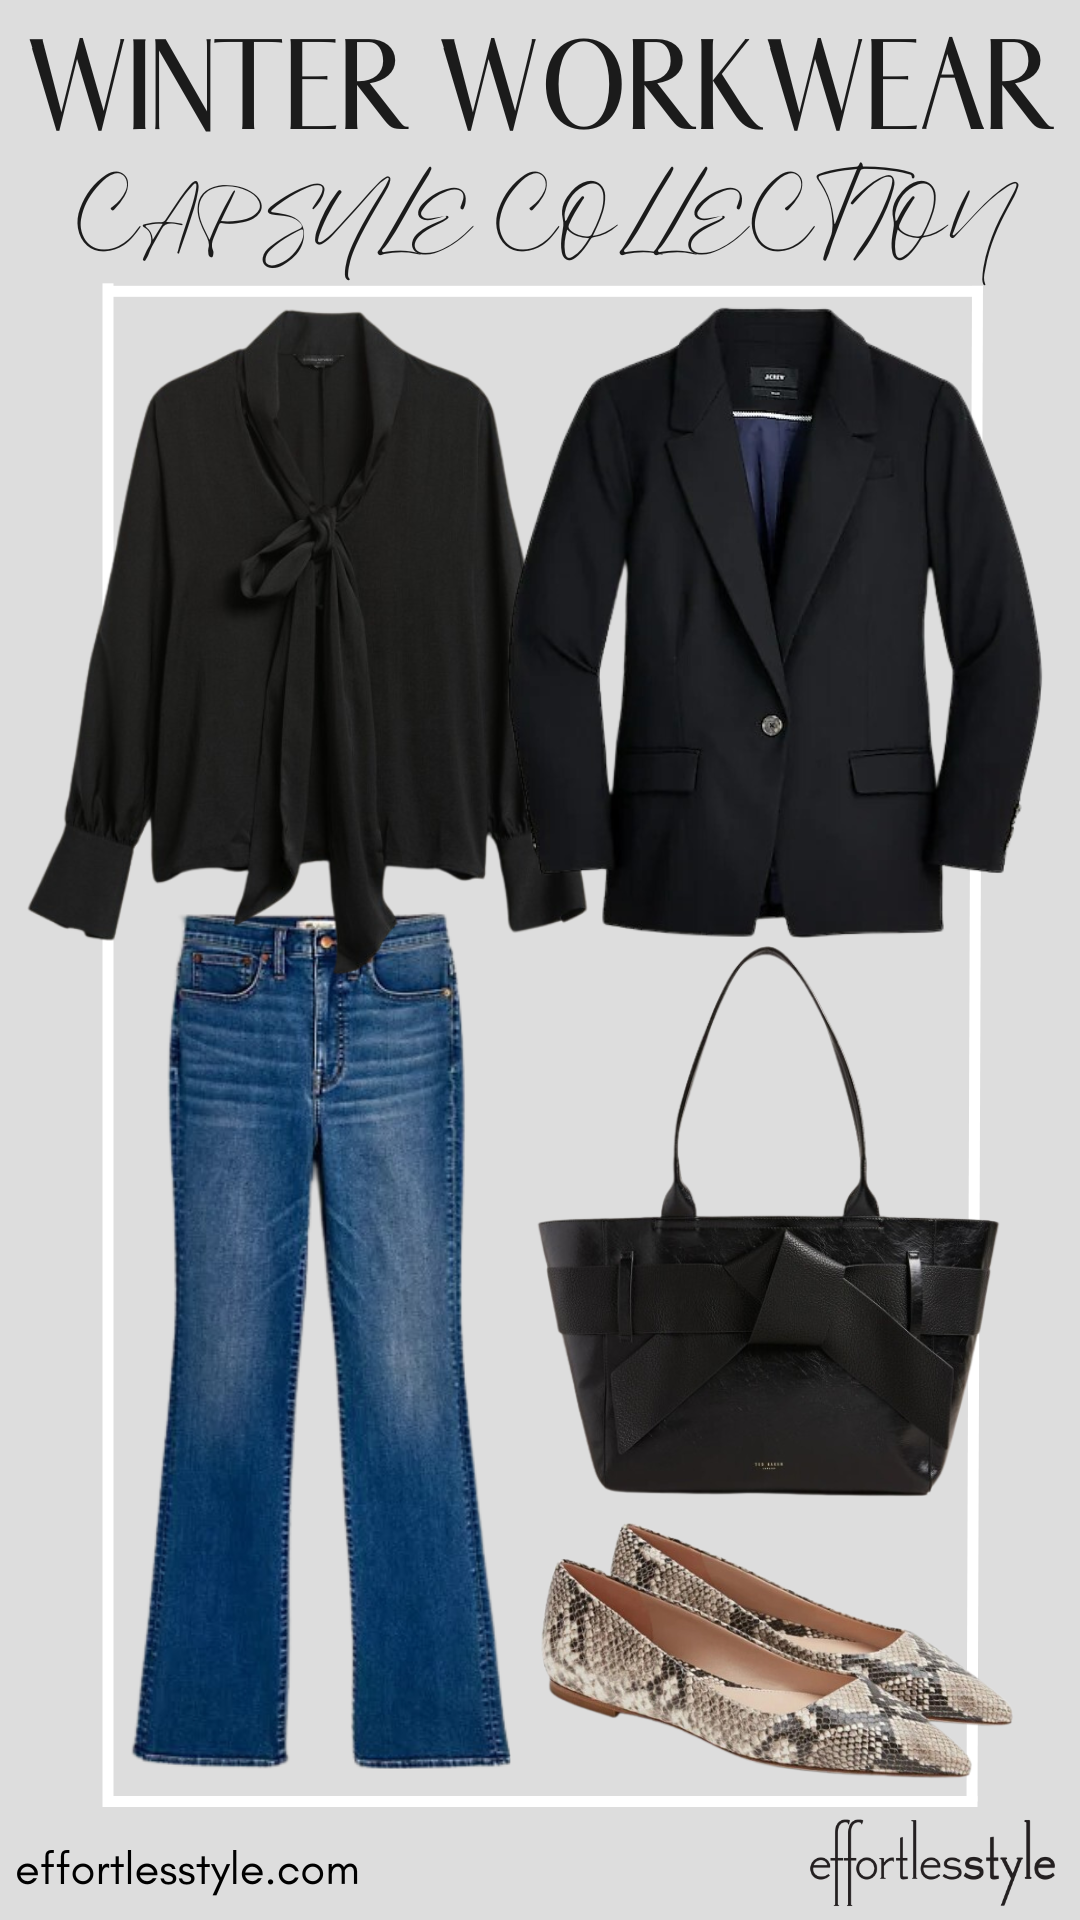 How To Wear Our Winter Workwear Capsule Wardrobe - Part 1 Bow Neck Blouse & Dark Wash Jeans personal stylists share must have pieces for winter workwear how to style a bow neck blouse for the office how to wear an elevated blouse with jeans how to style your jeans for work how to style flare jeans